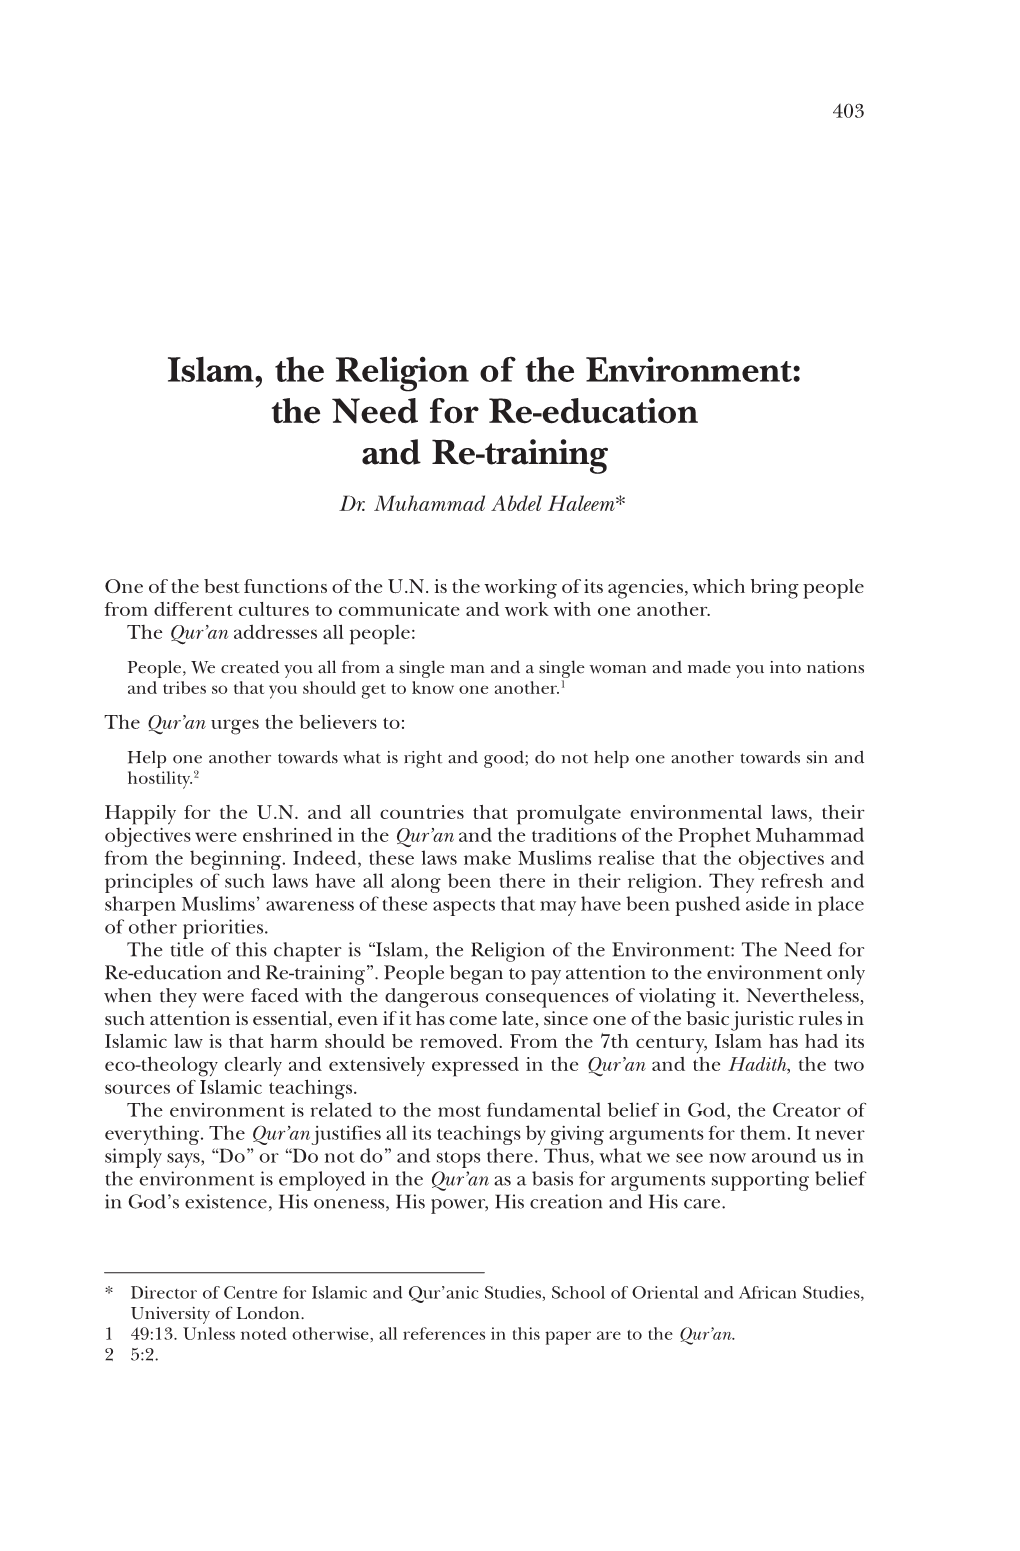 Islam, the Religion of the Environment: the Need for Re-Education and Re-Training Dr